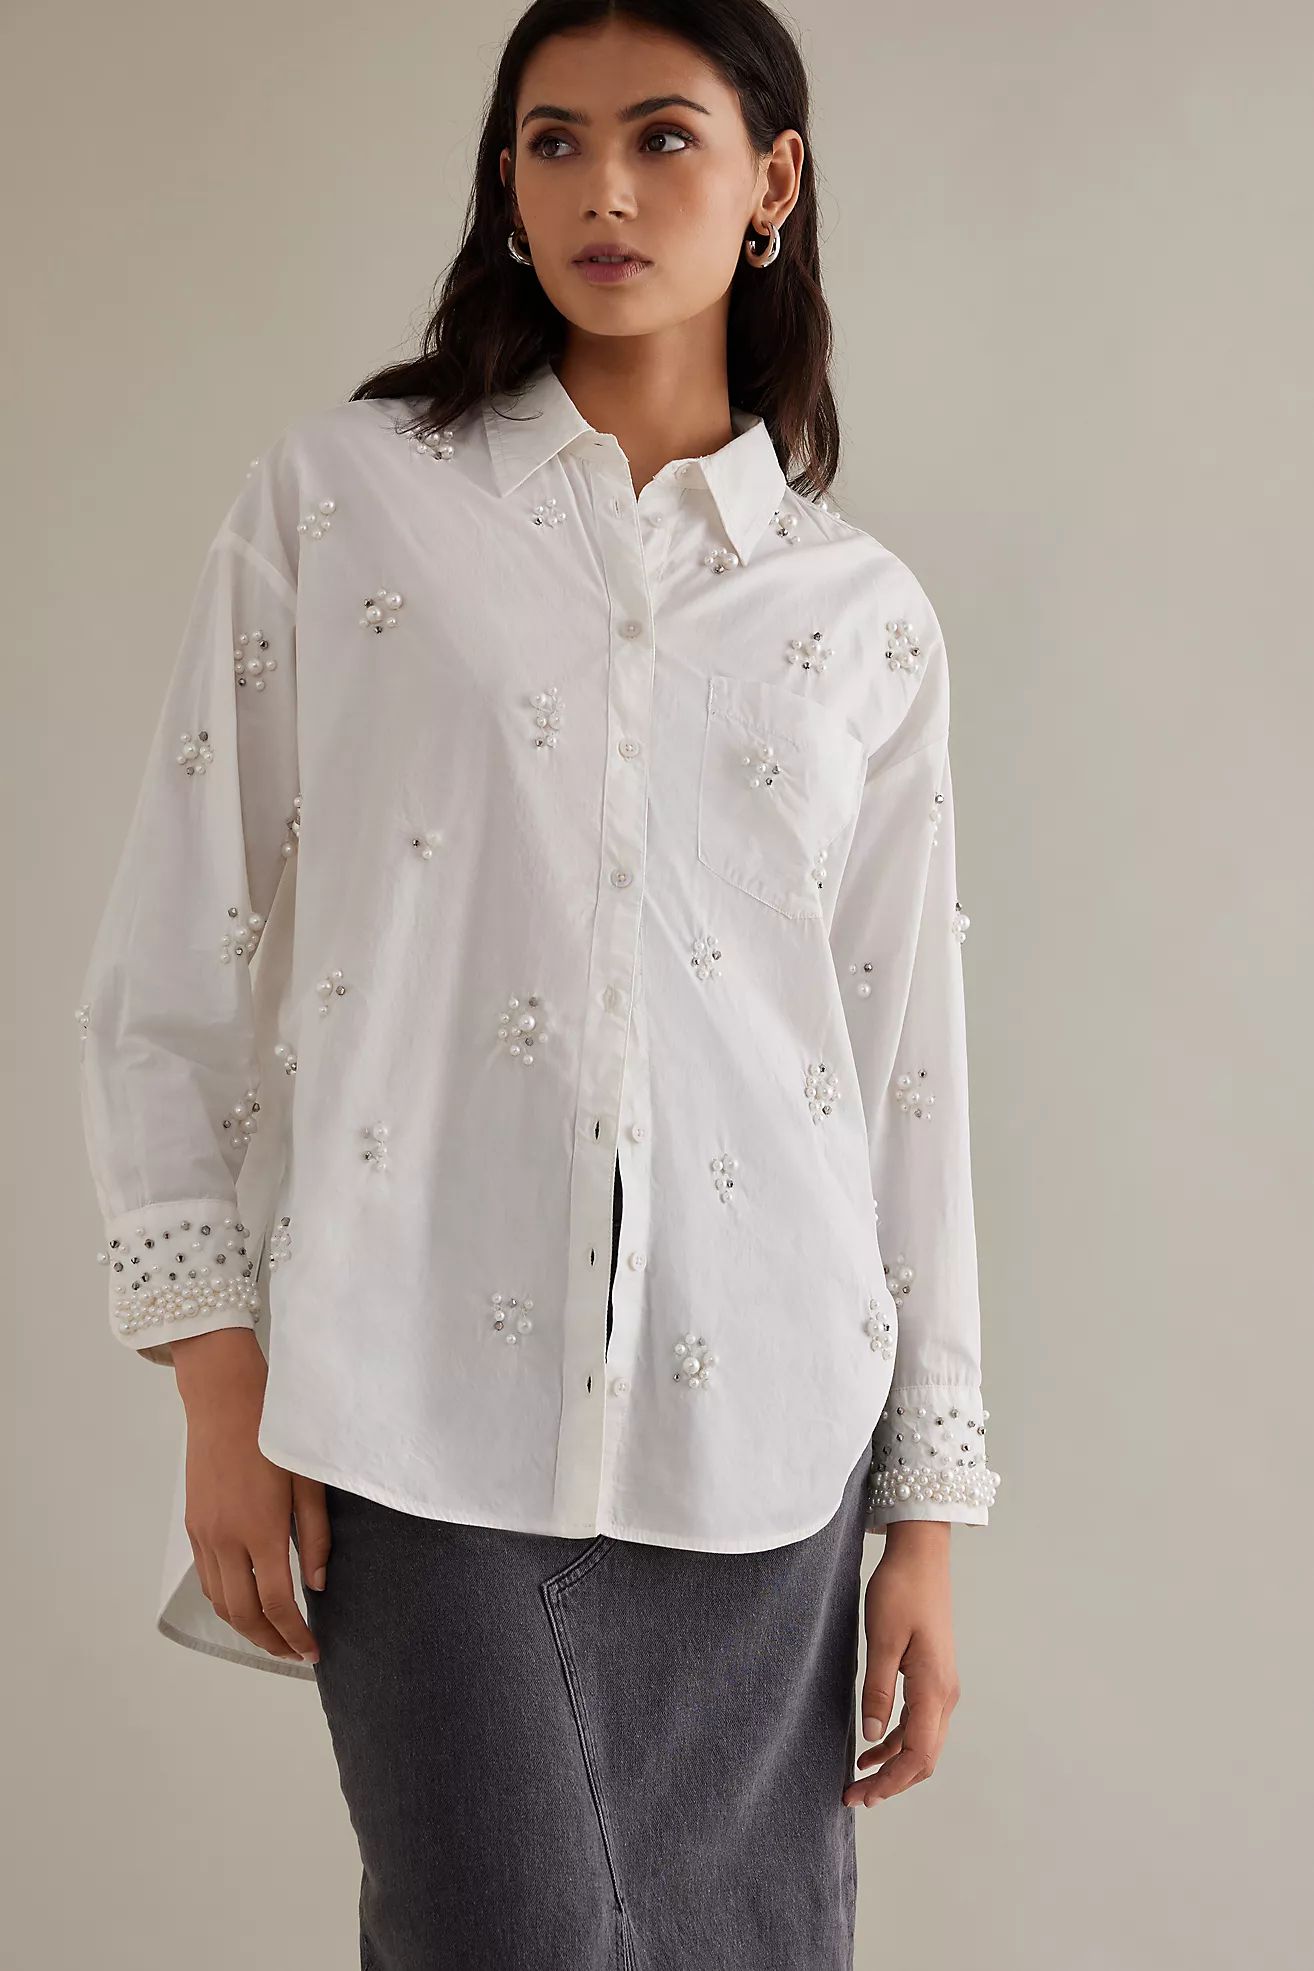 The Bennet Buttondown Shirt by Maeve: Pearl-Embellished Edition | Anthropologie (US)